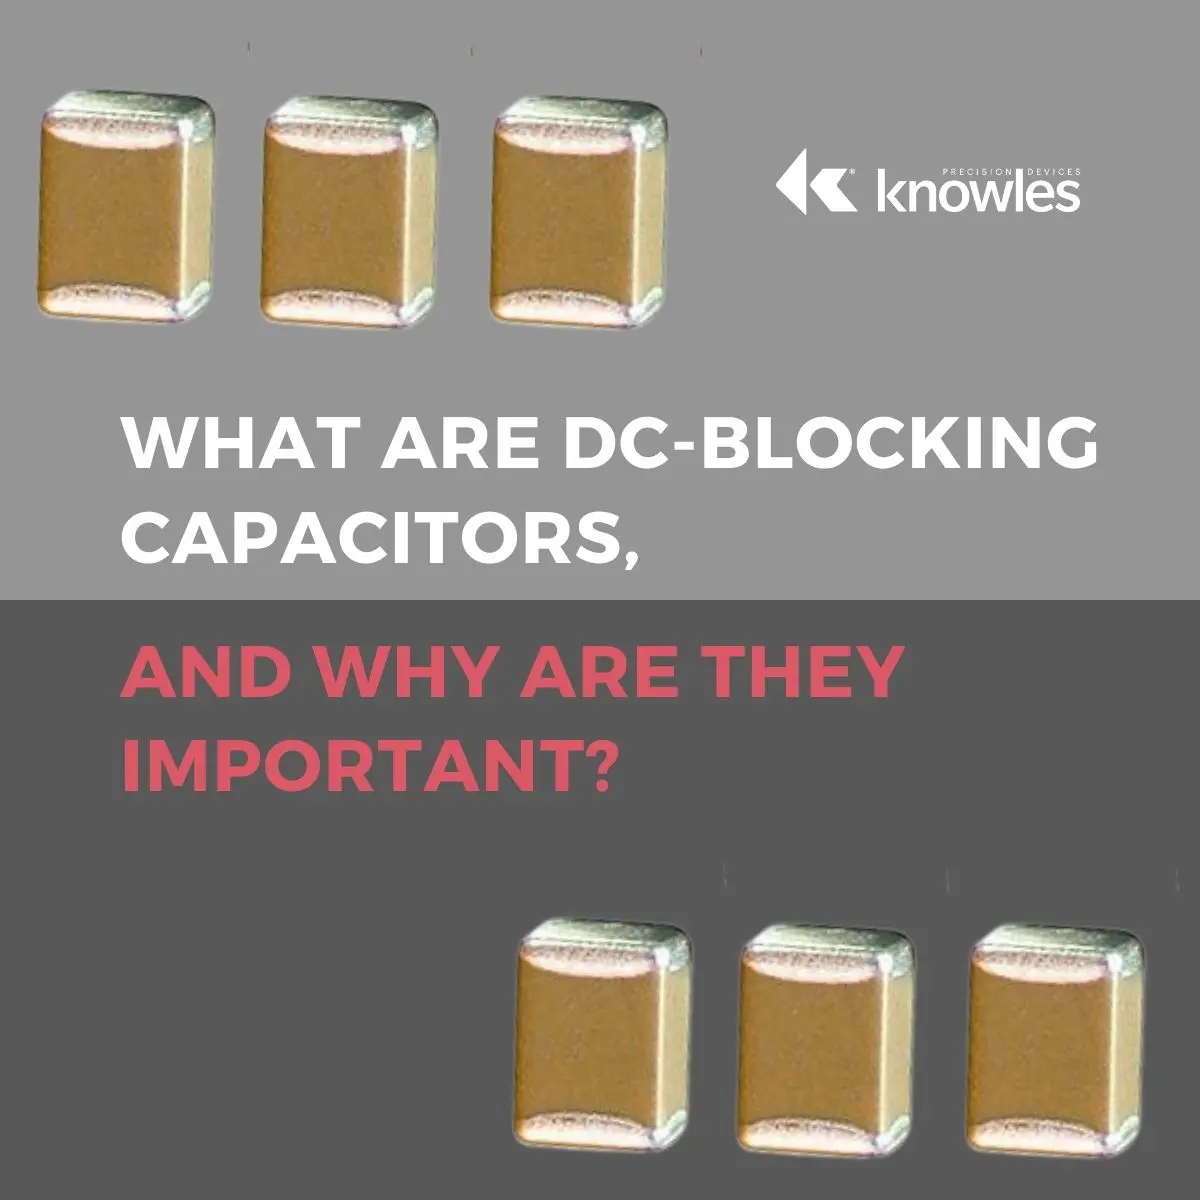 What Are DC-Blocking Capacitors, and Why Are They Important?